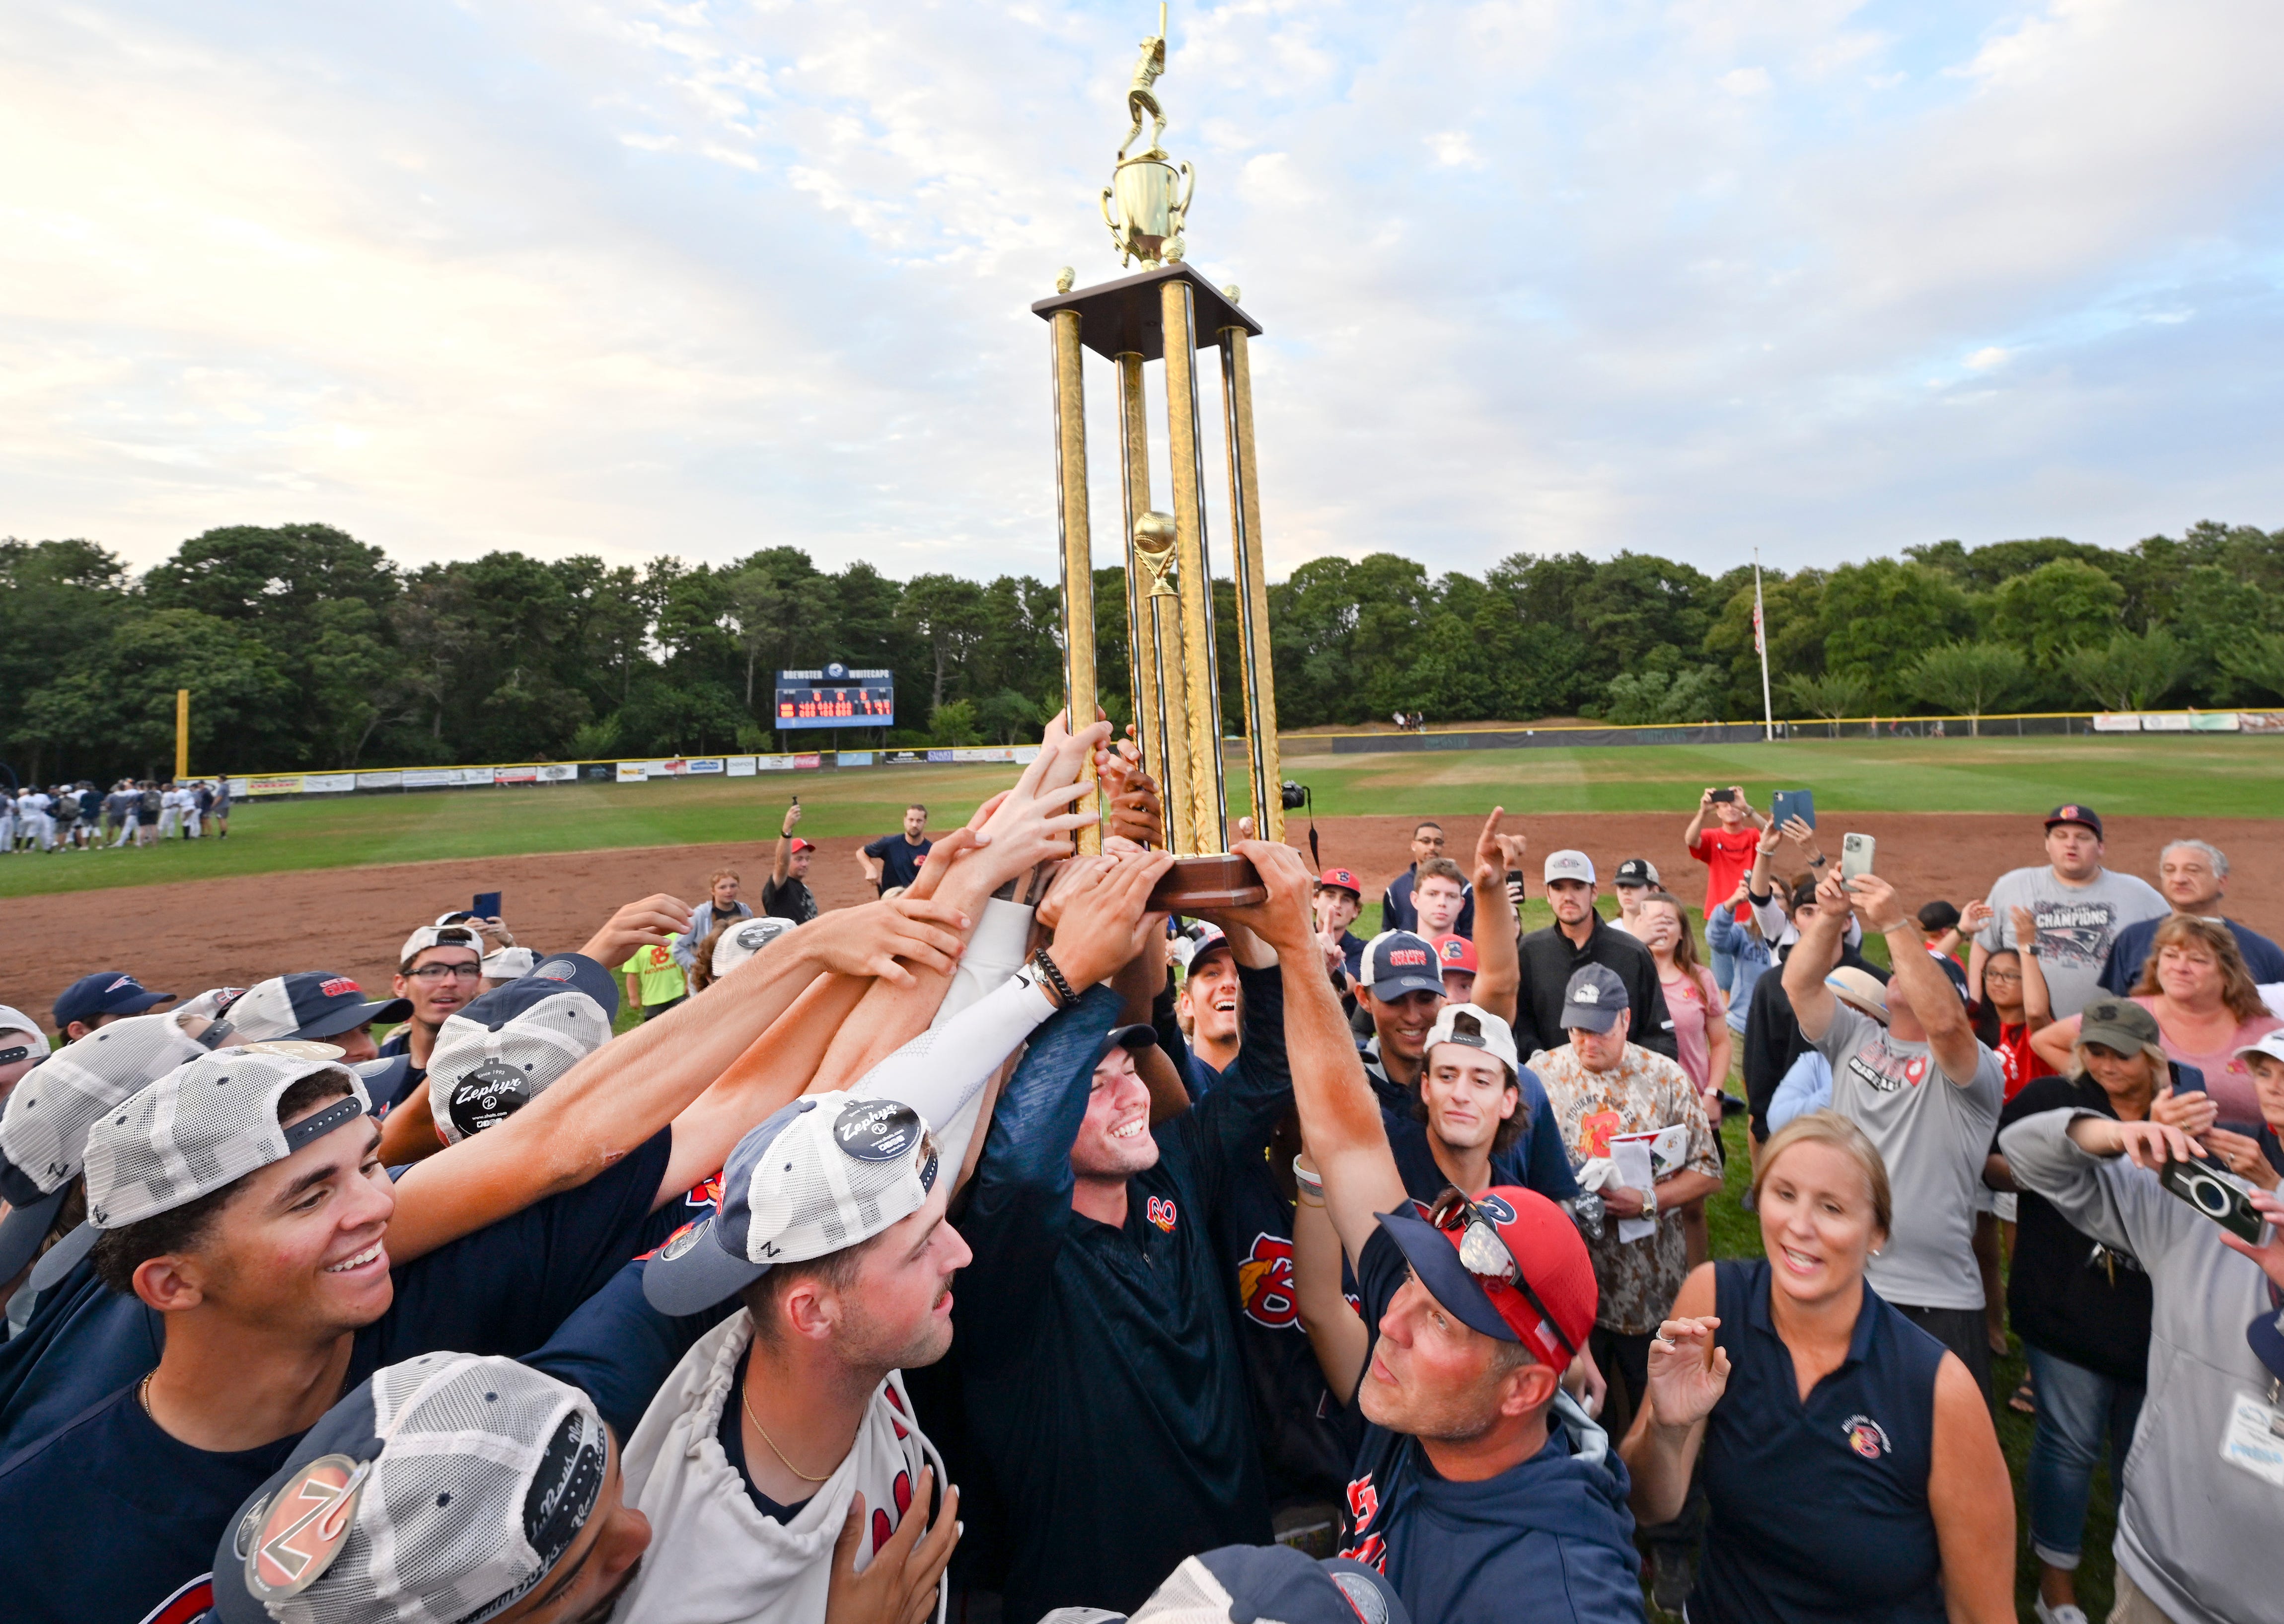 Six things to know about the 2023 Cape Cod Baseball League season